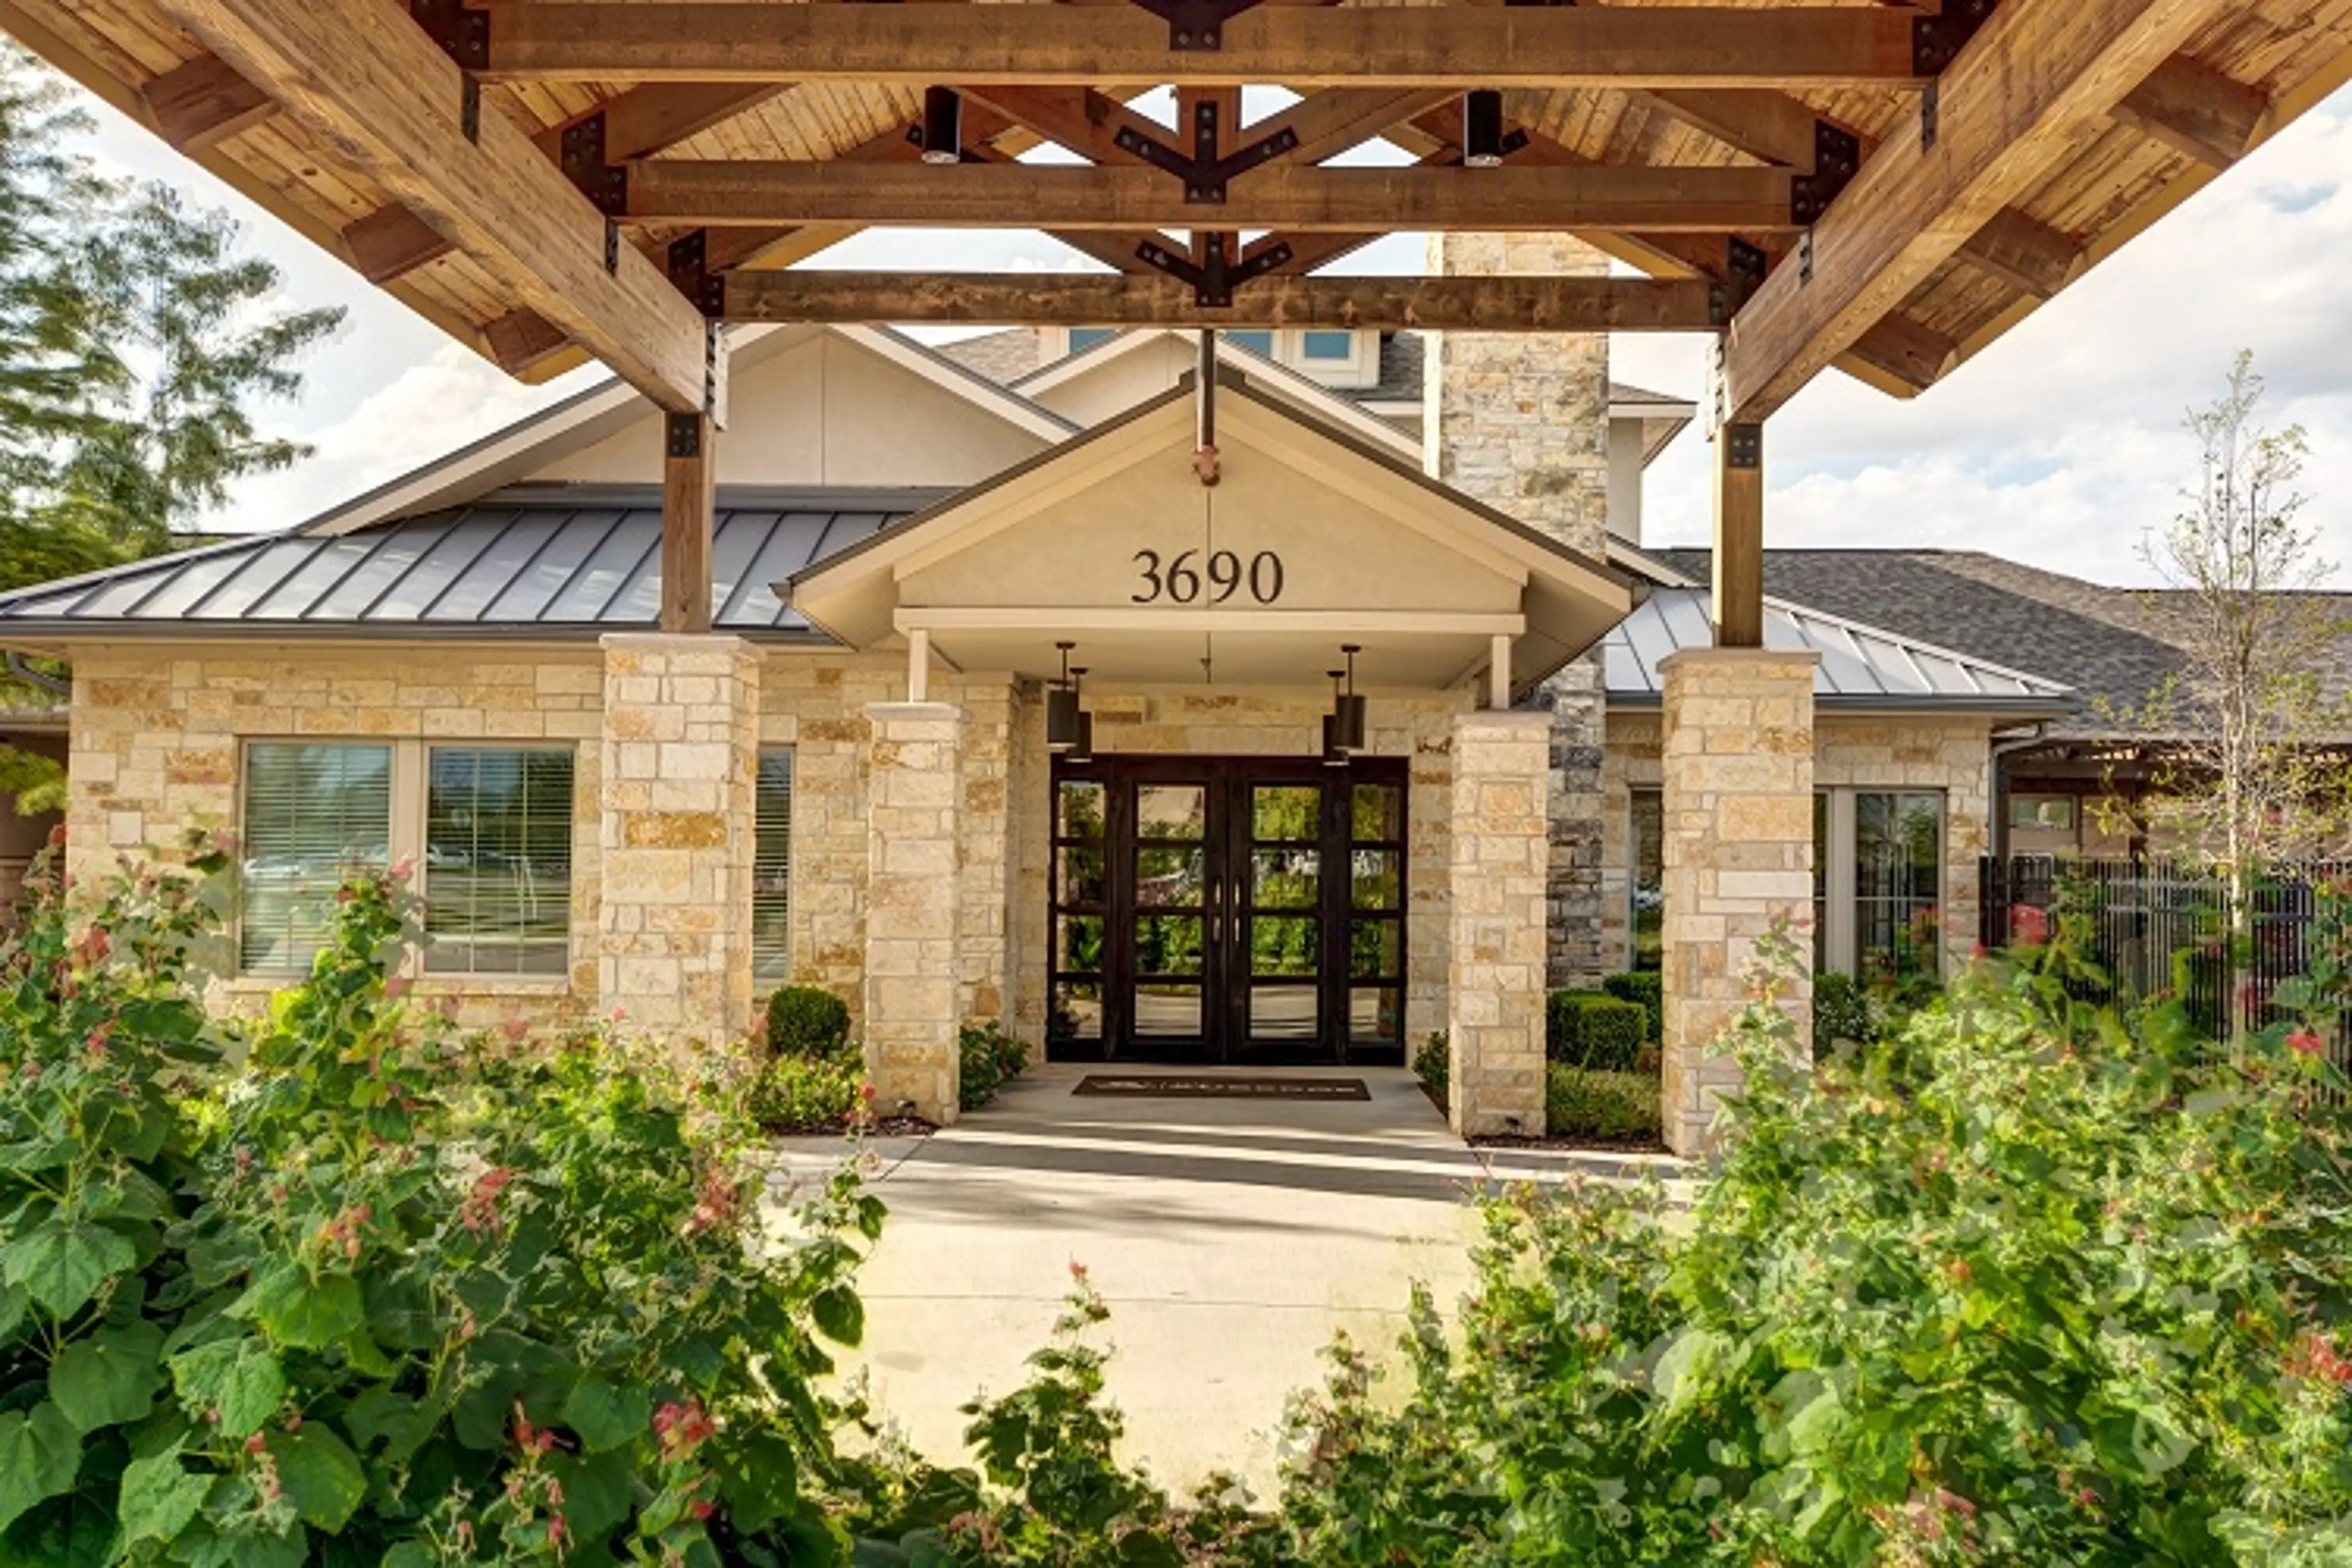 The Auberge at Plano